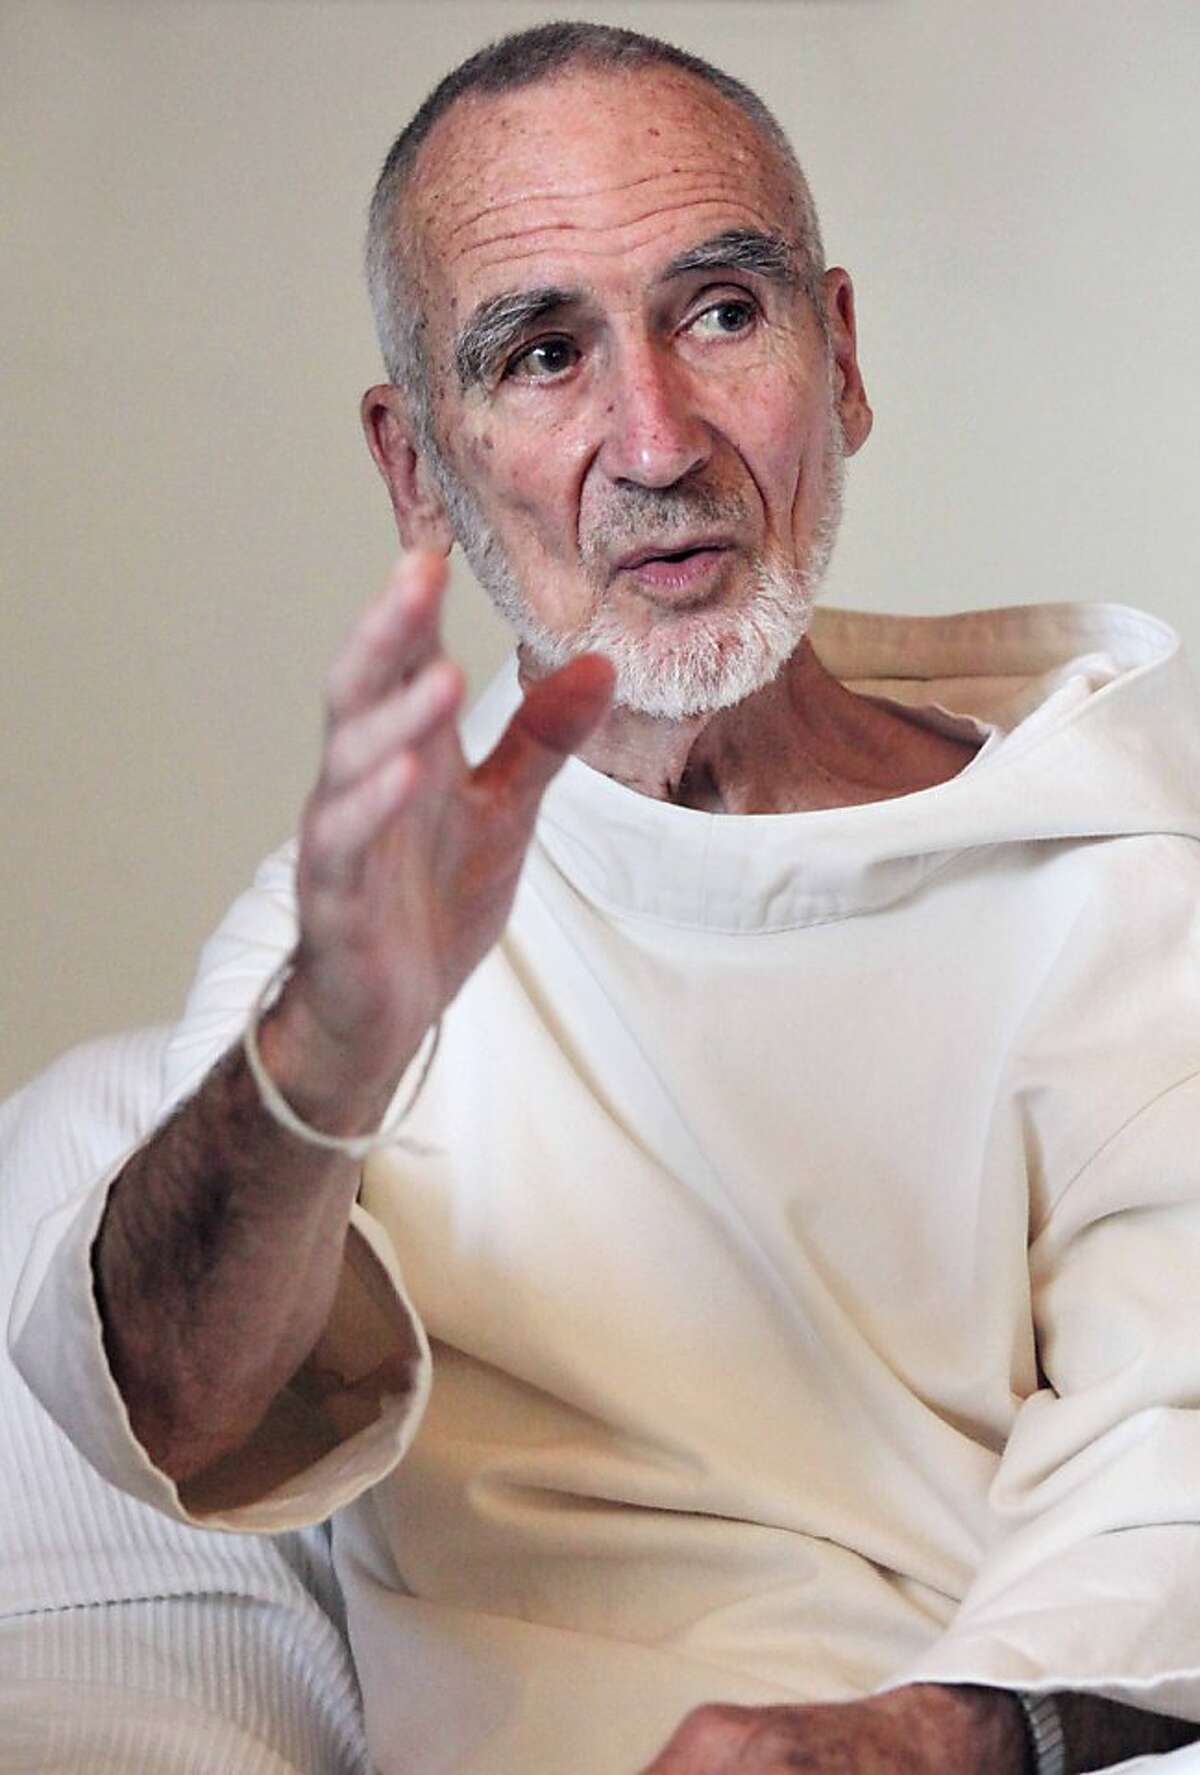 Brother David Steindl-Rast, 85, is a Benedictine monk. He is considered by many to be the spiritual leader of the "gratitude movement." He will speak with scientists, poets, teachers, and spiritual leaders at the "Pathways to Gratefulness" conference.